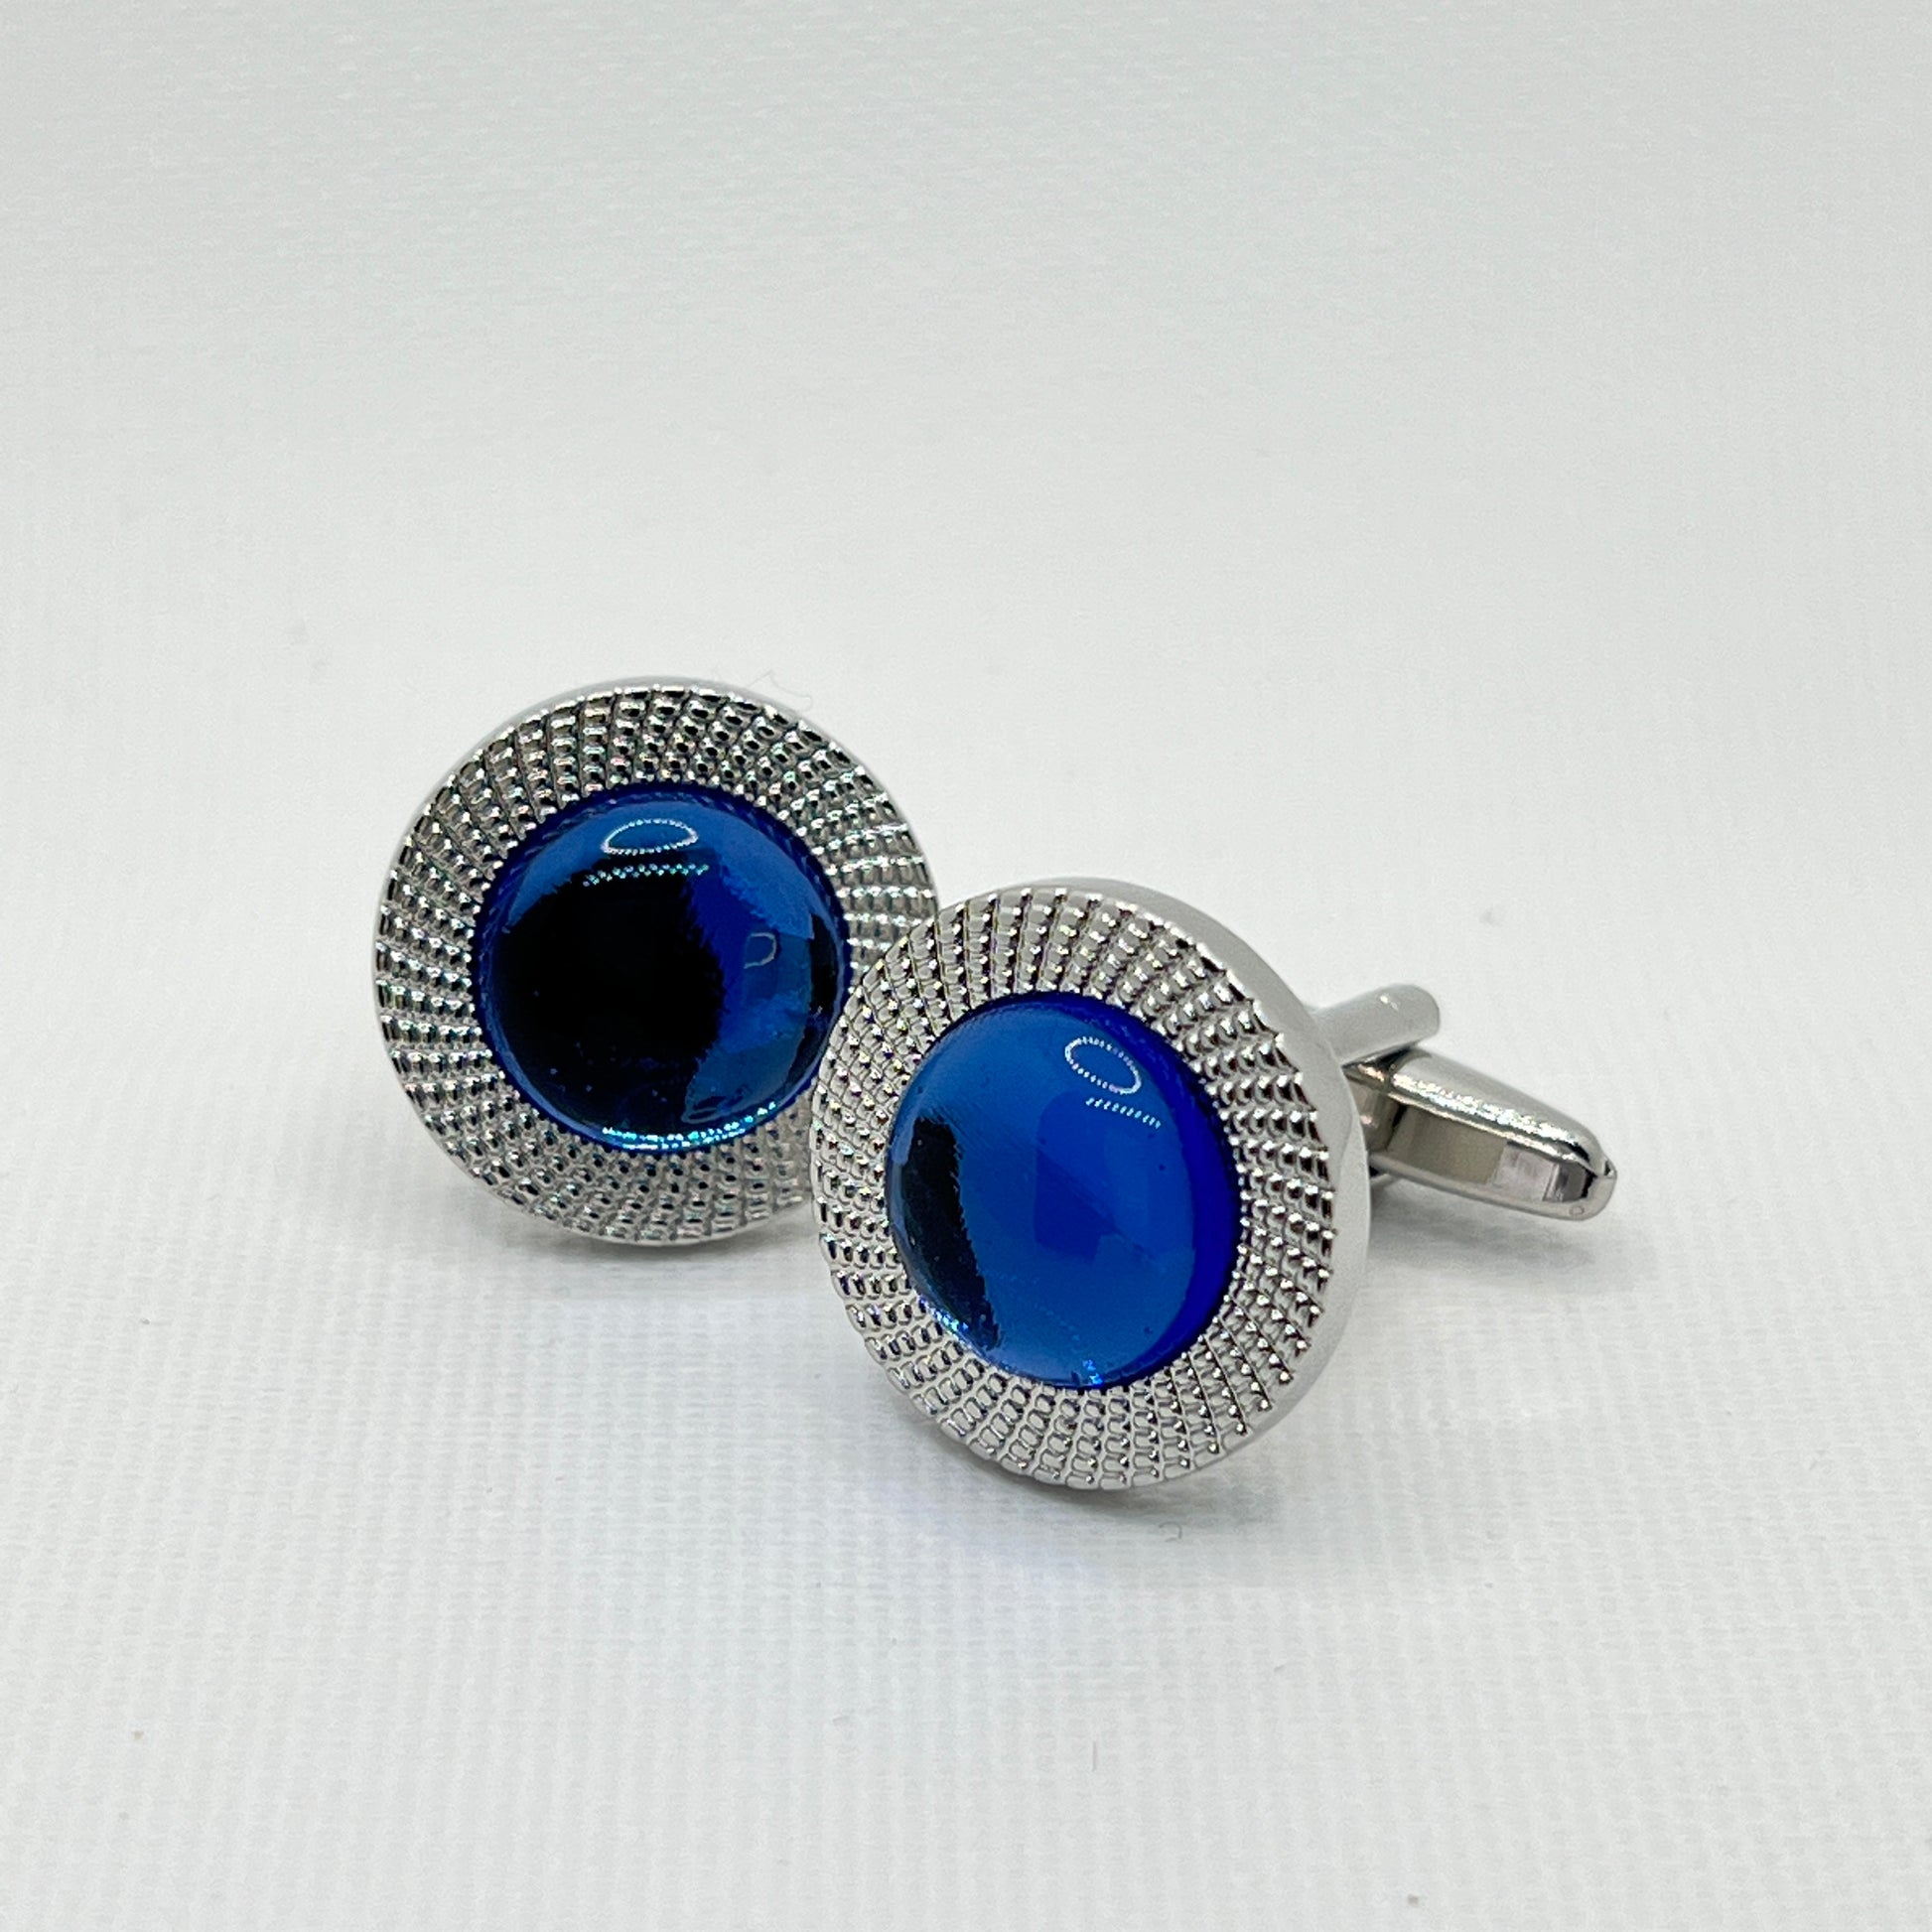 Round machined cufflinks with striking clear blue crystal